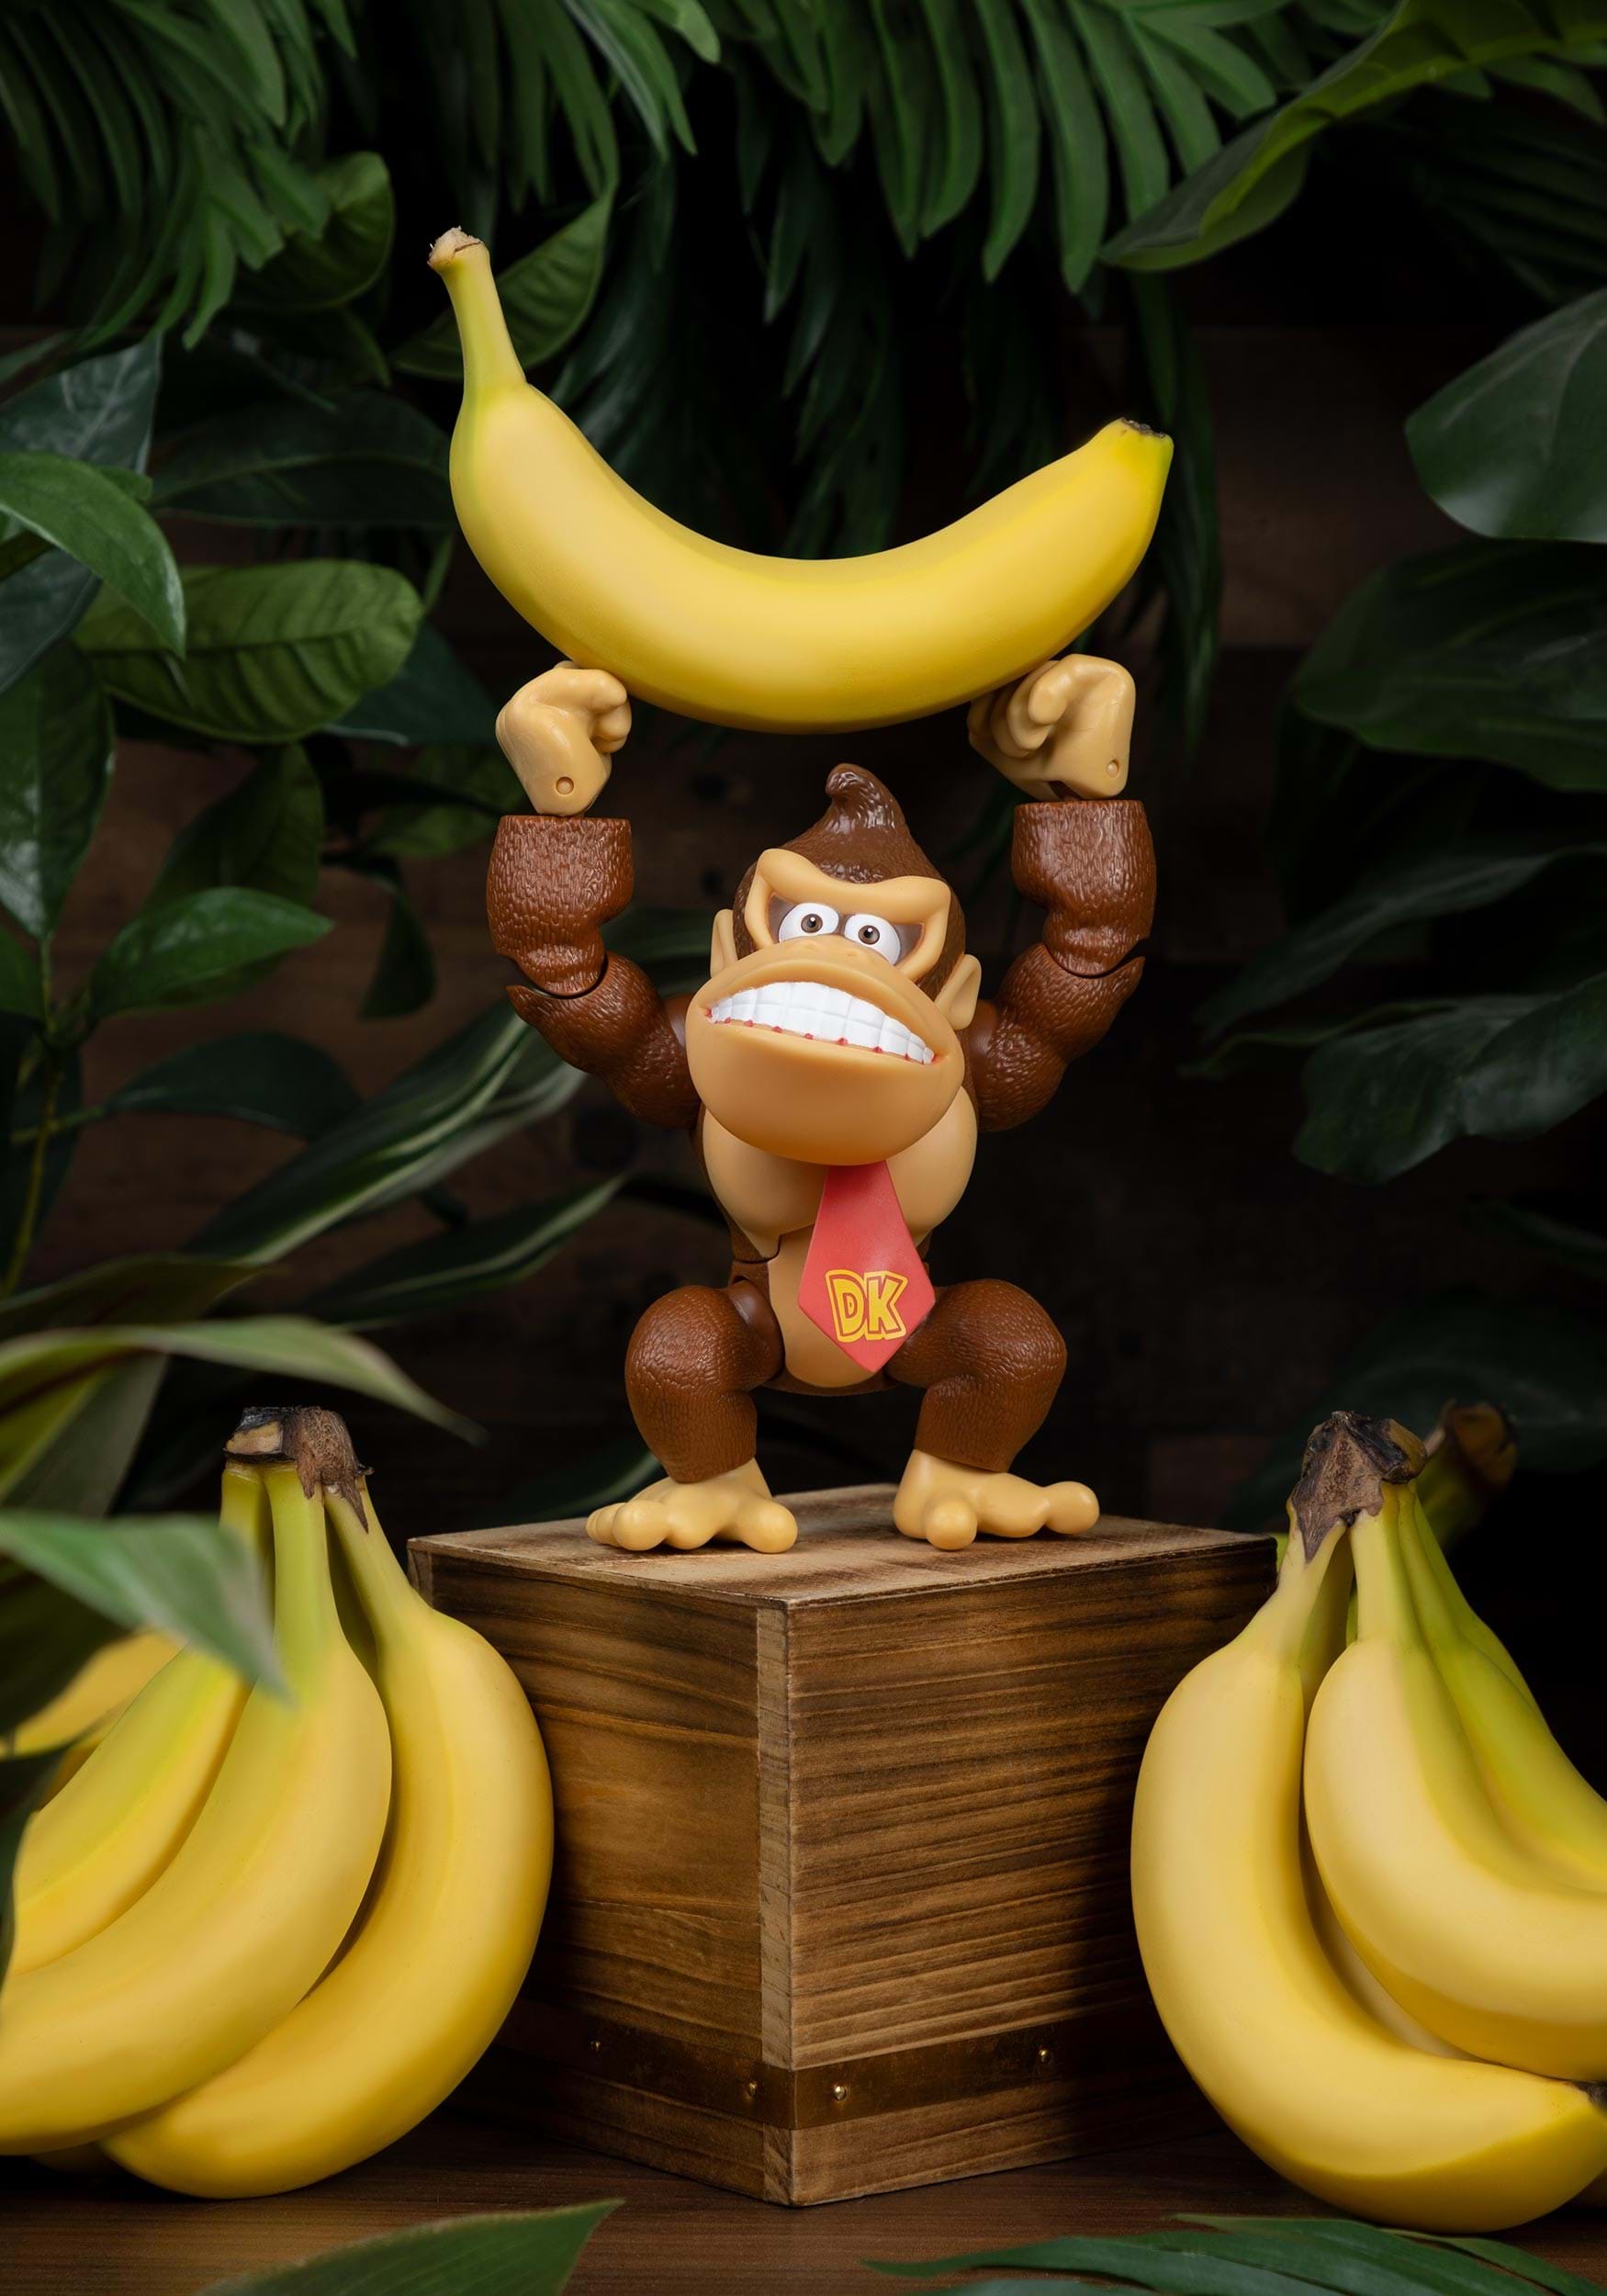 https://images.fun.com/products/81996/2-1-216676/super-mario-6-scale-donkey-kong-action-figure-alt-1.jpg